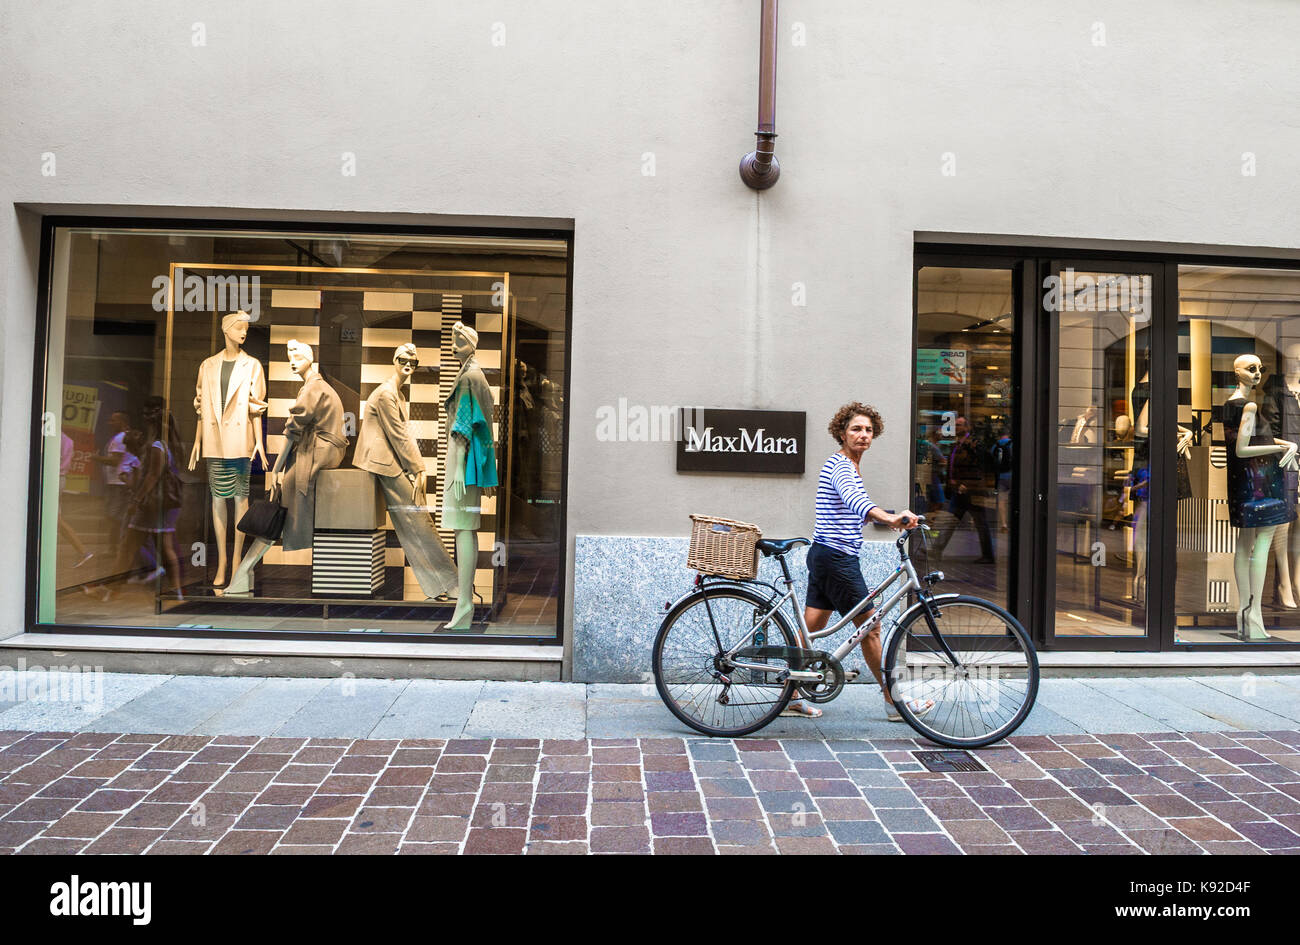 Female cyclist walking her bike in front of a MaxMara clothing shop. Stock Photo